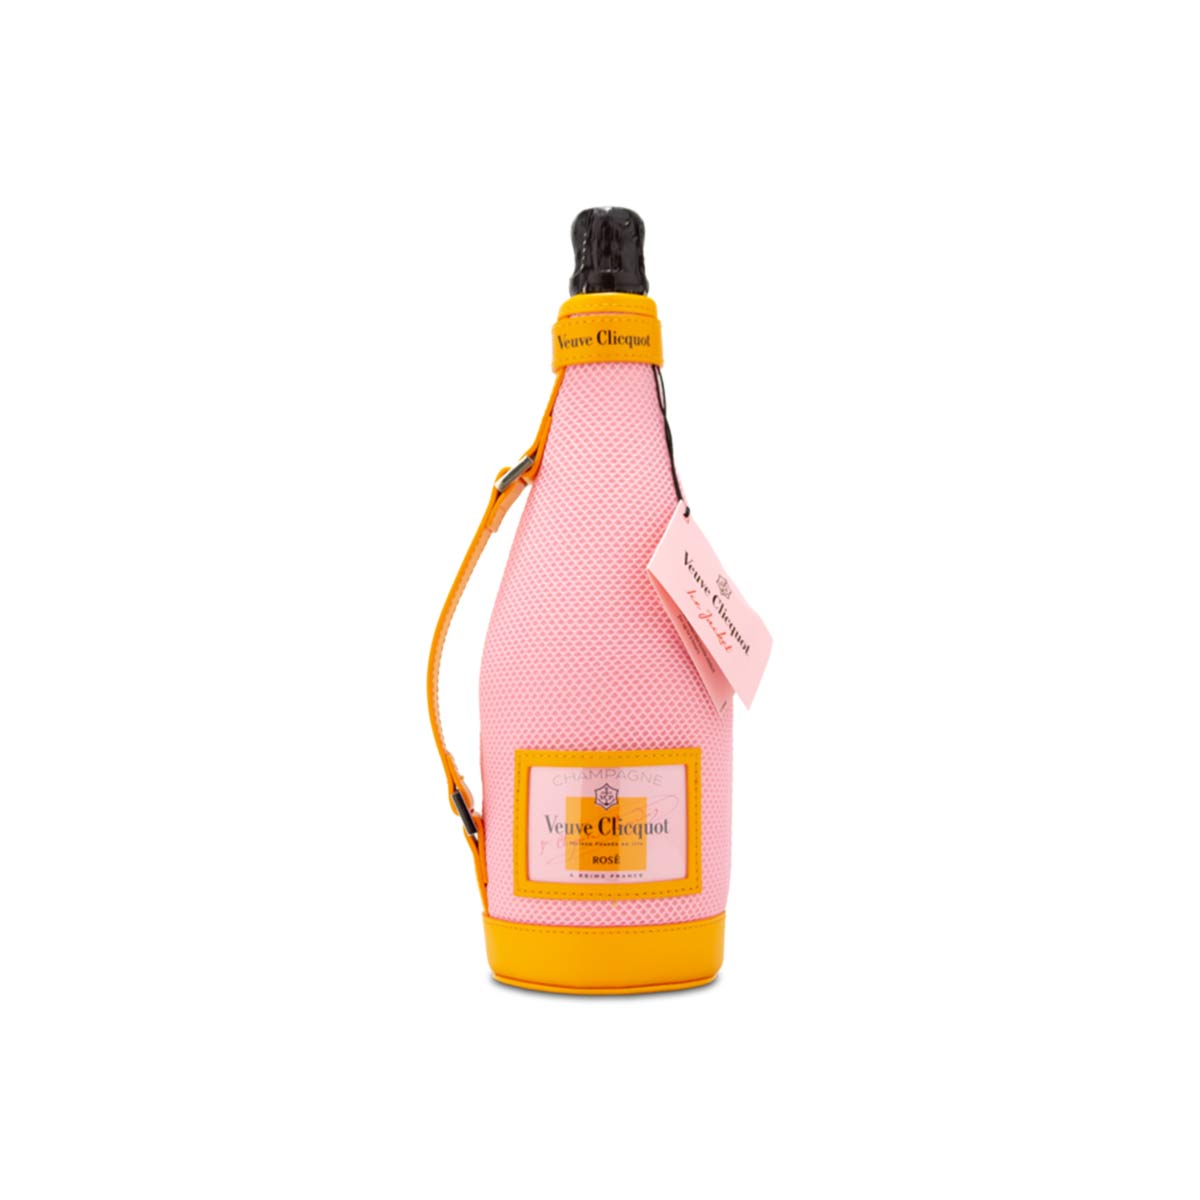 Veuve-Clicquot-Rose-Champagne-Ice-Jacket